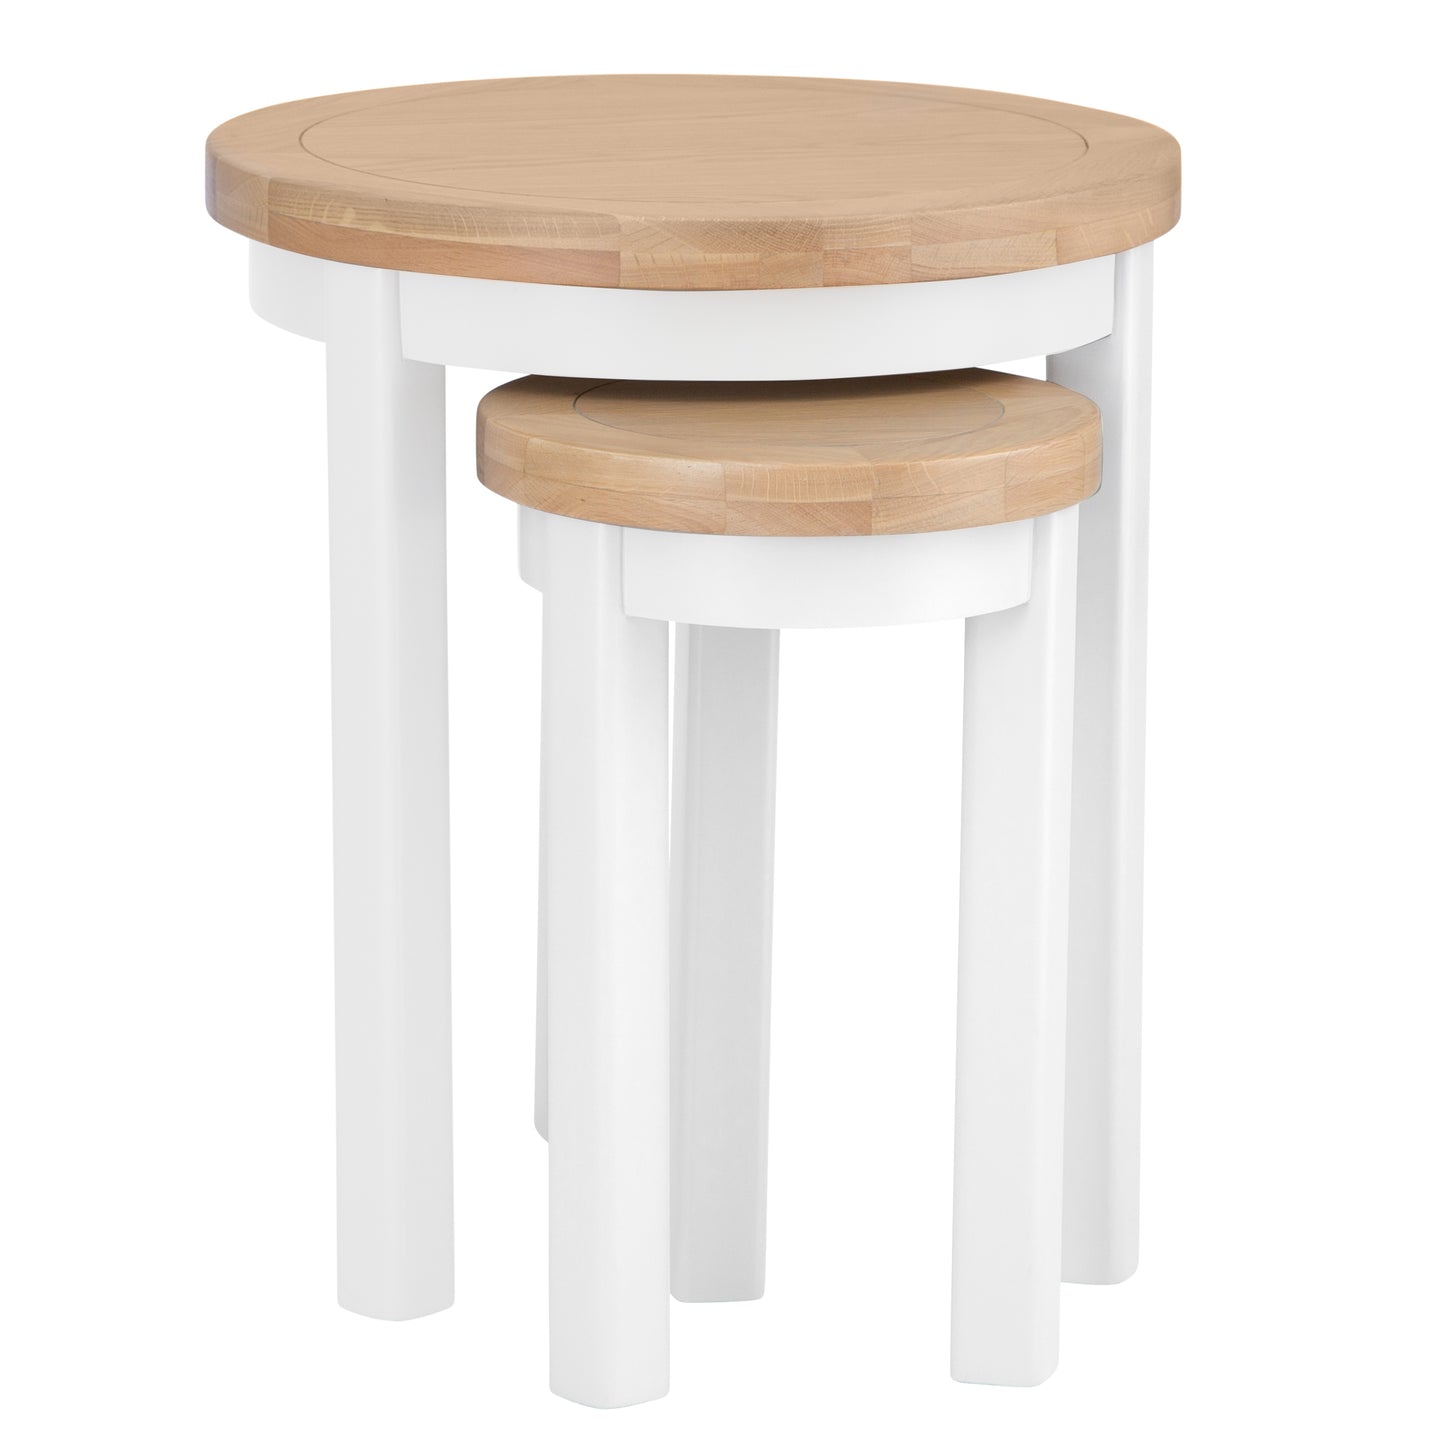 Eaton Round Nest of 2 Tables